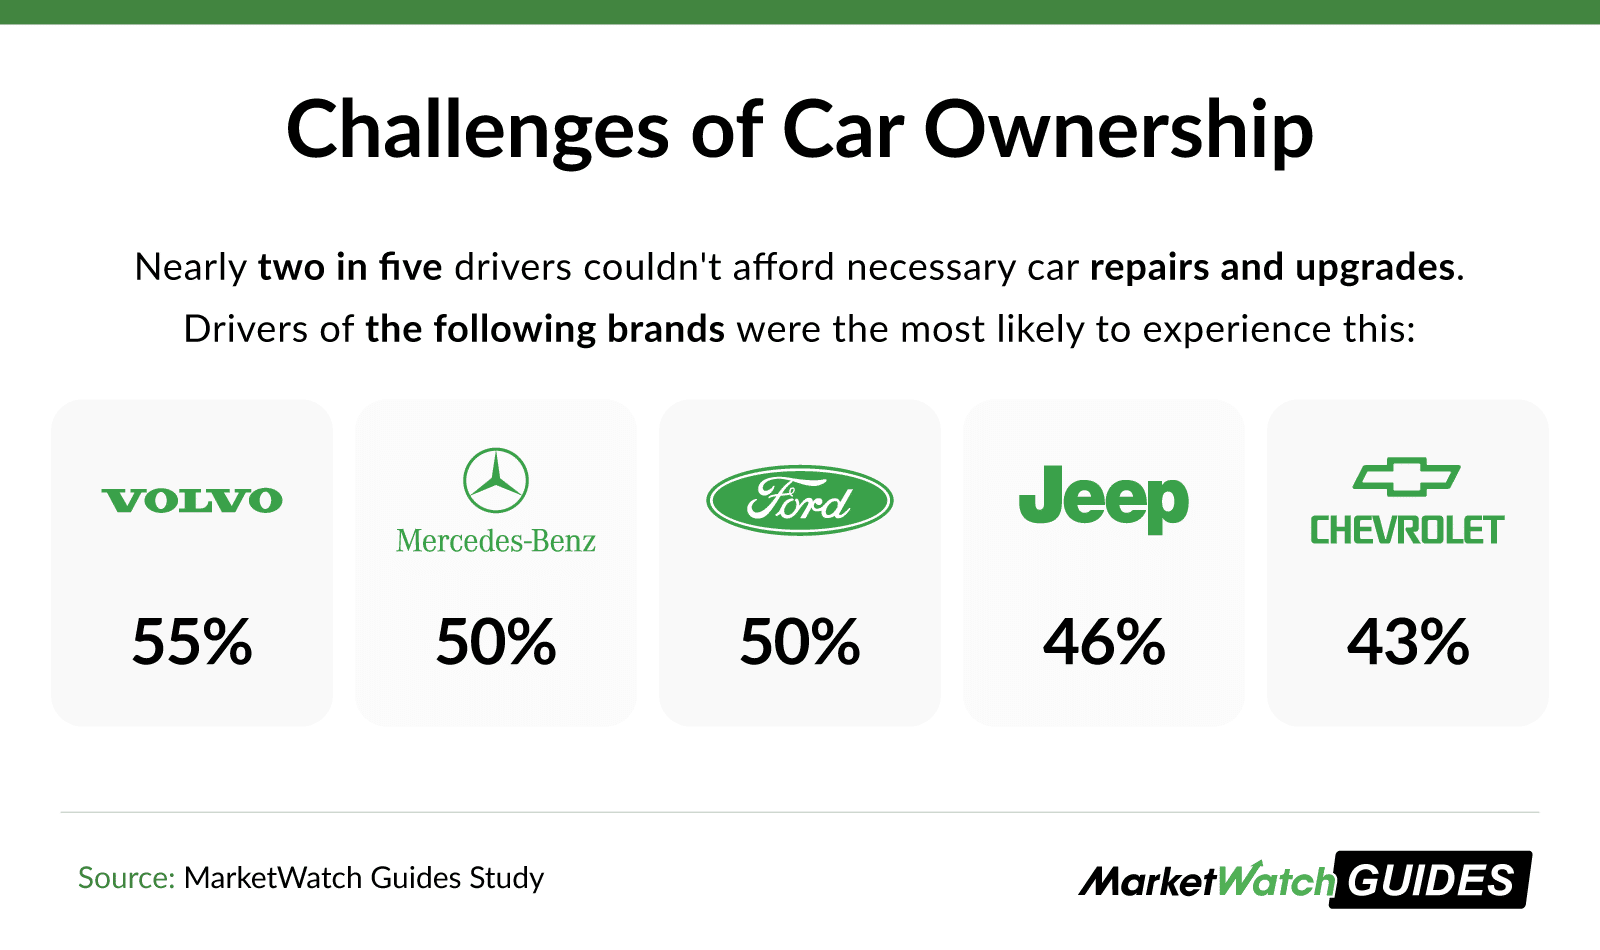 Graphic showing the auto brands for which drivers most often have trouble affording the repairs, with Volvo and Ford topping the list.